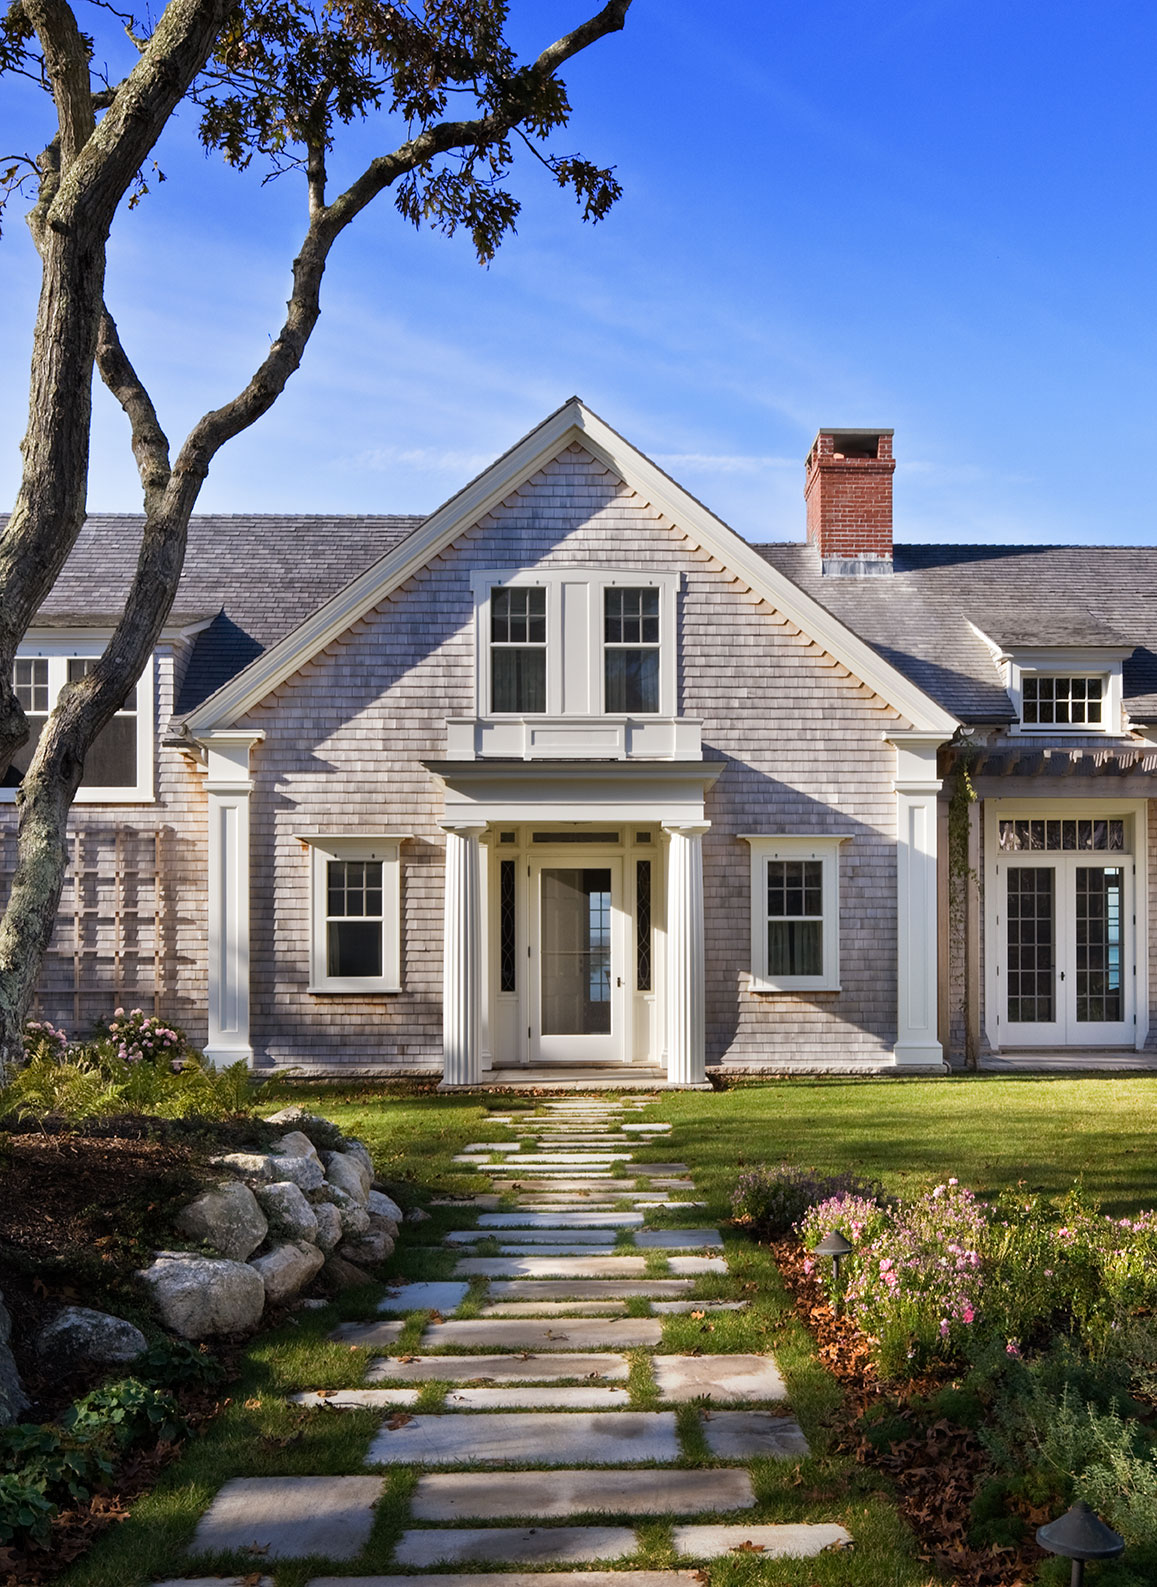 "A New Residence - West Tisbury" by Ferguson & Shamamian Architects - Residential Over 5,000 SF